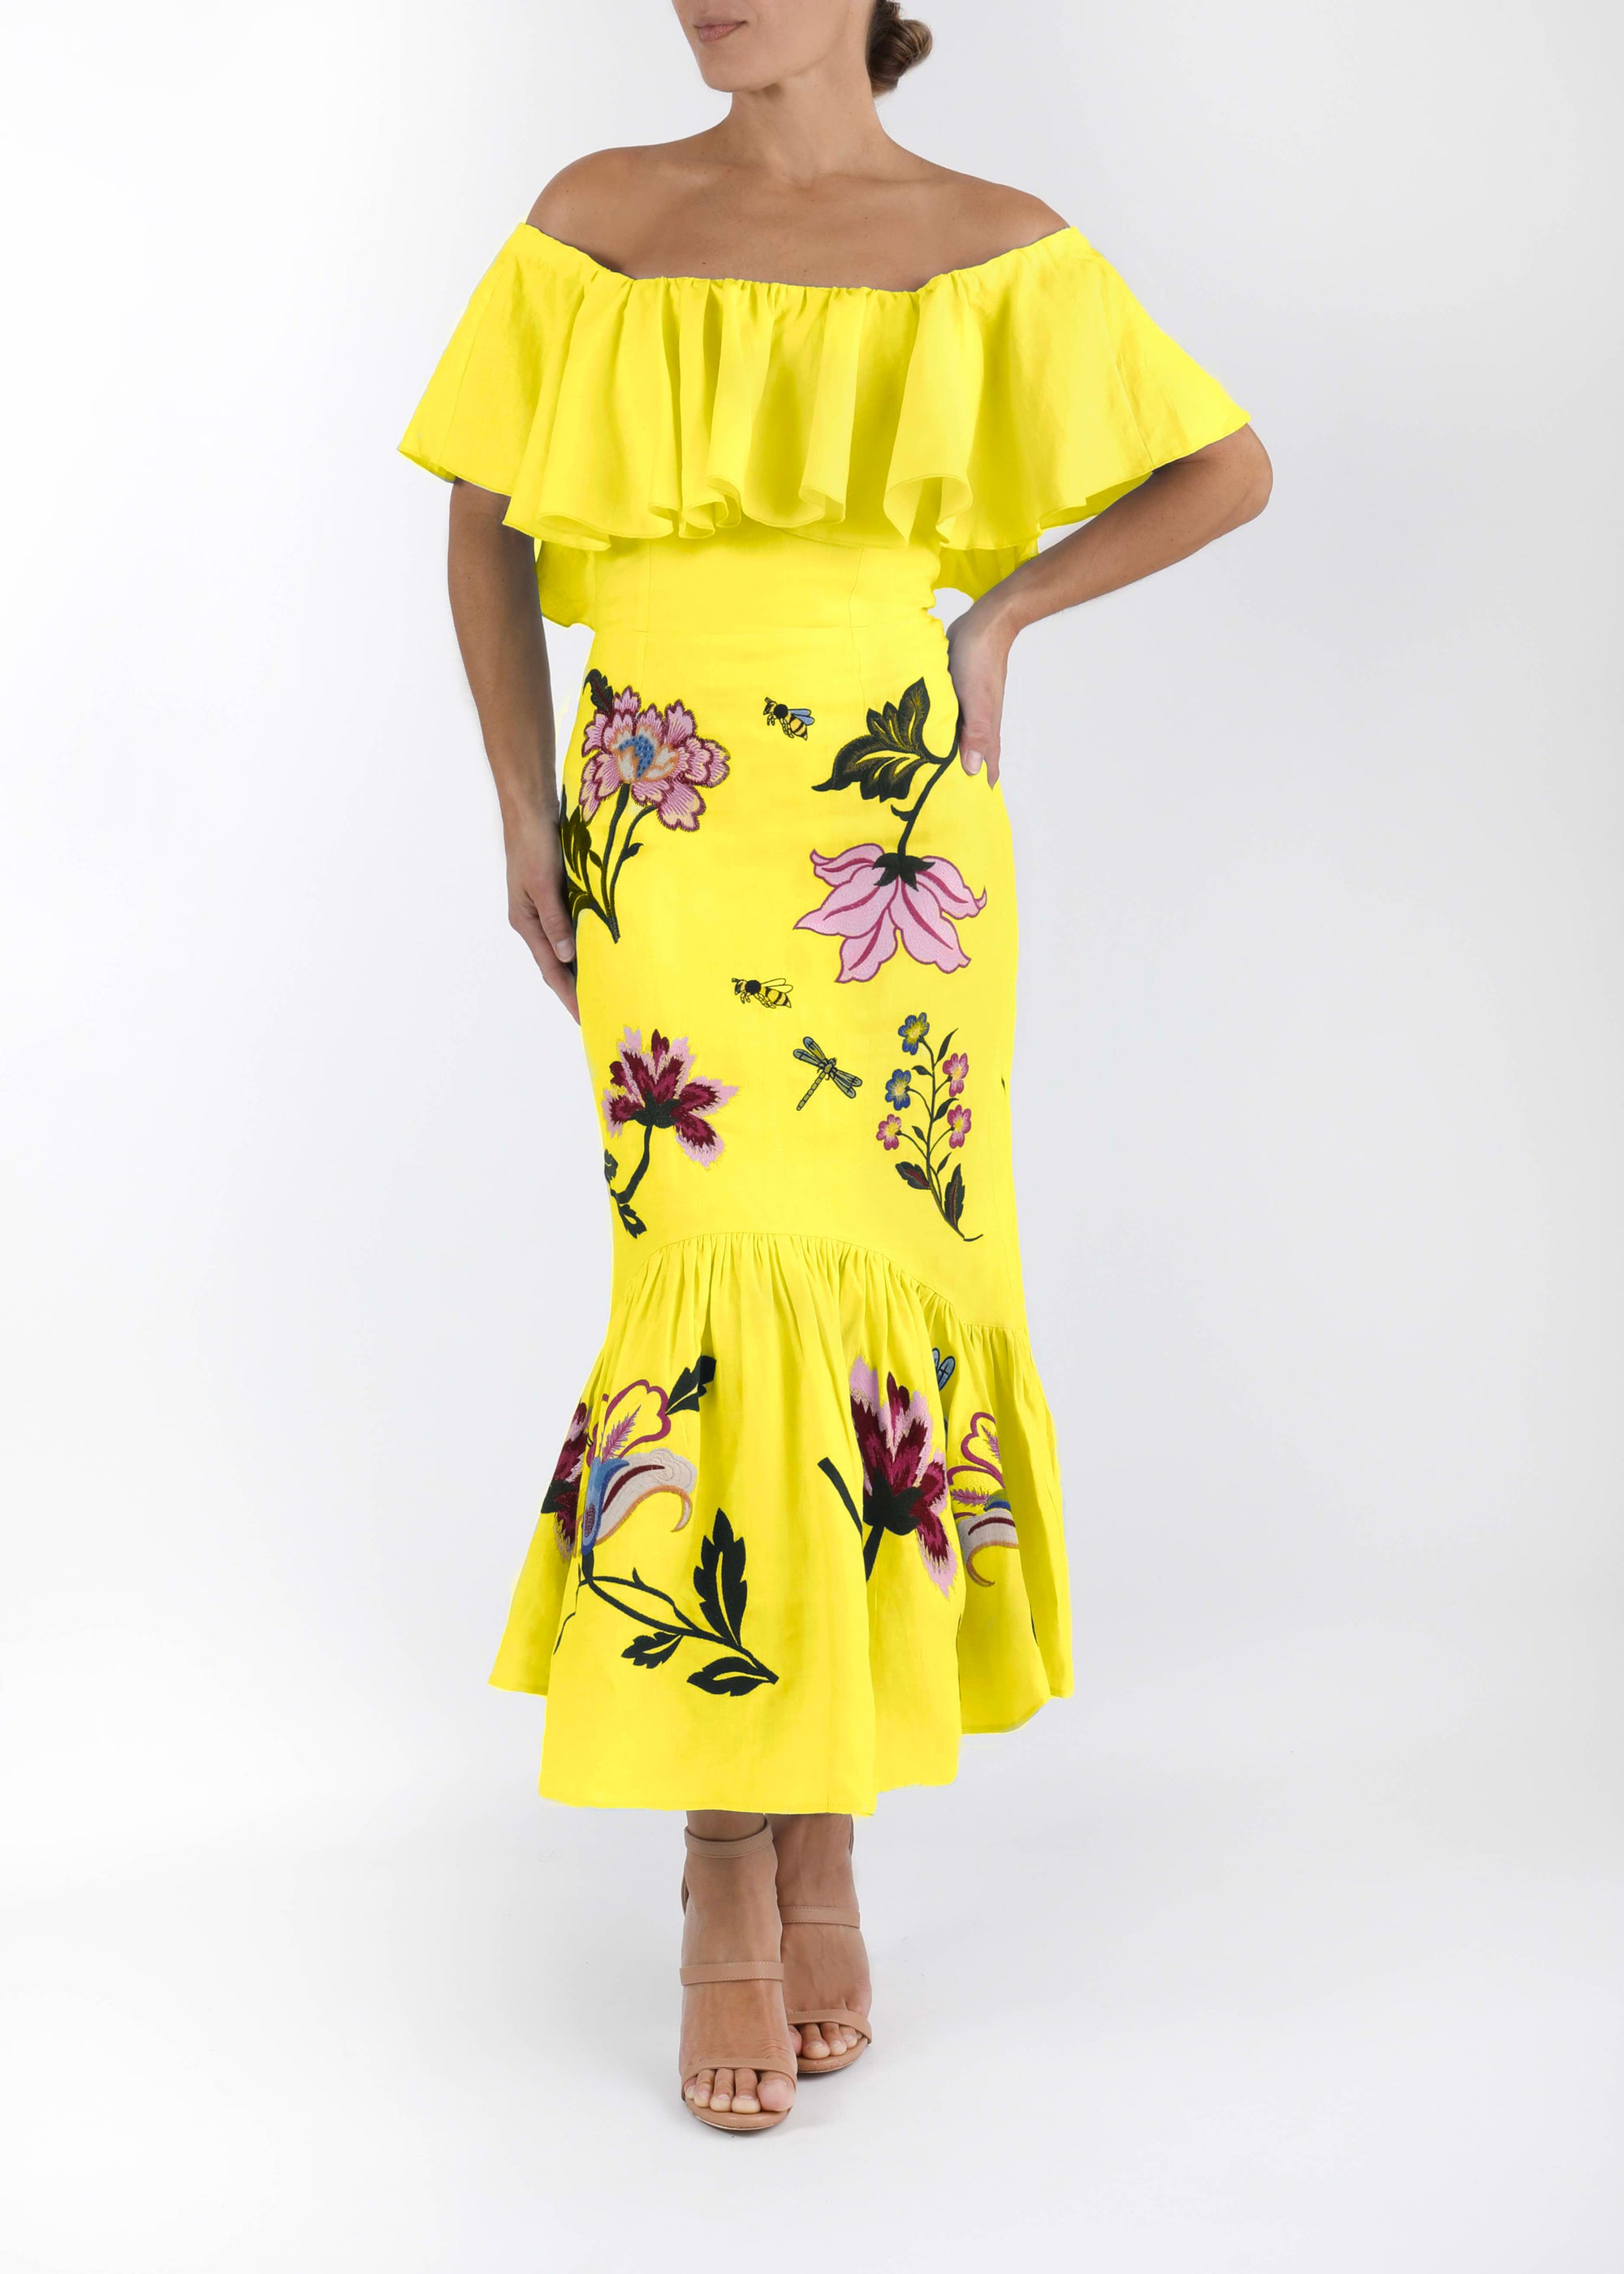 Fanm Mon and Over the Moon Bright Yellow Clarissa Dress